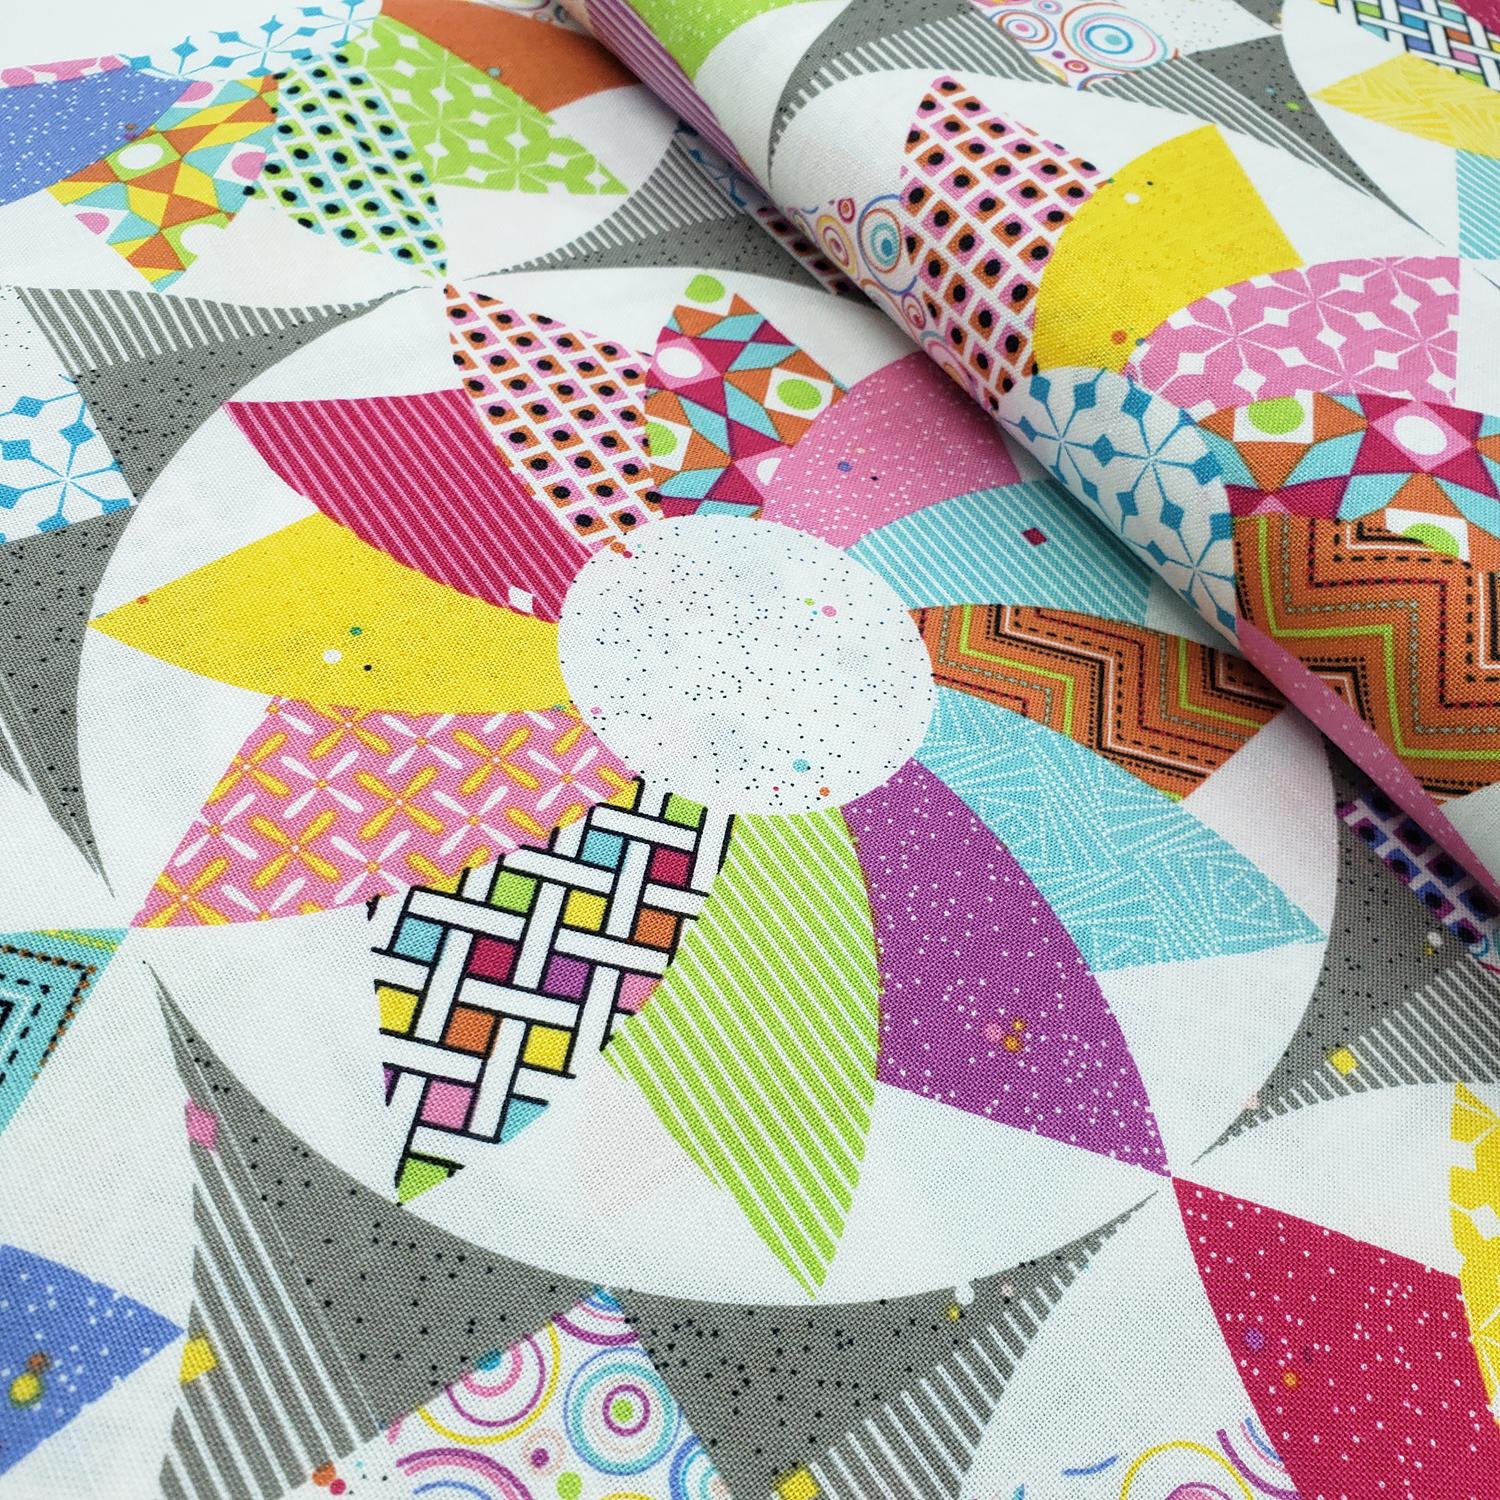 riley blake,colour wall,color,cheater,patchwork, sue Daley, cotton,patchwork,quilt,granny